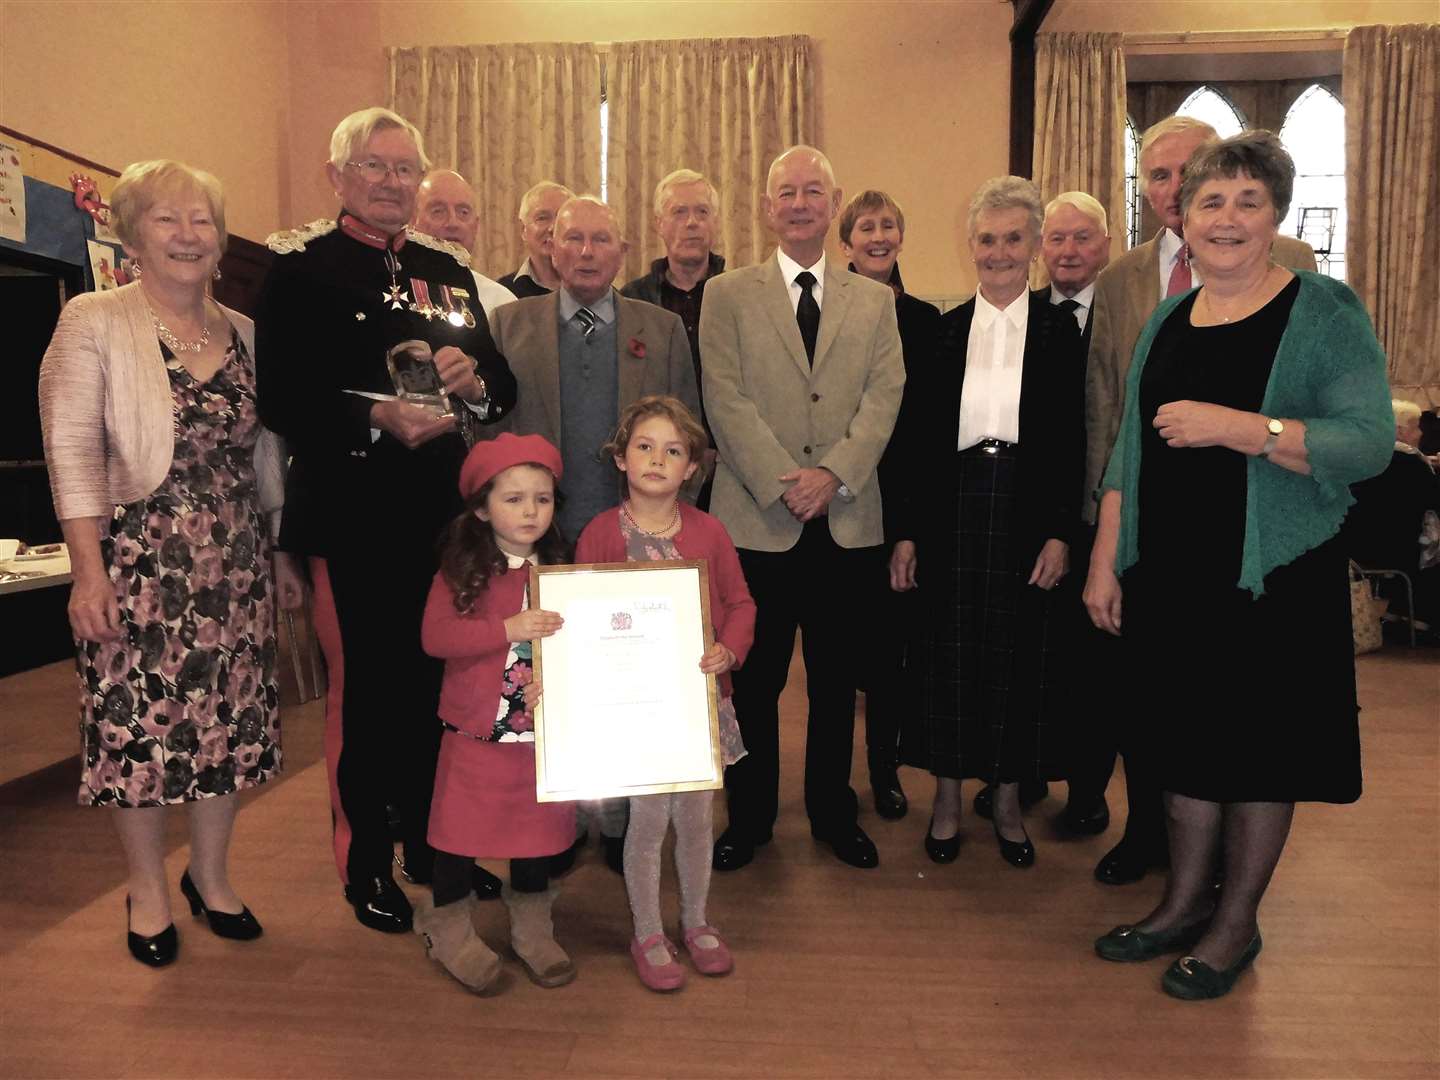 Forres In Bloom representatives with the Lord Lieutenant and their award.